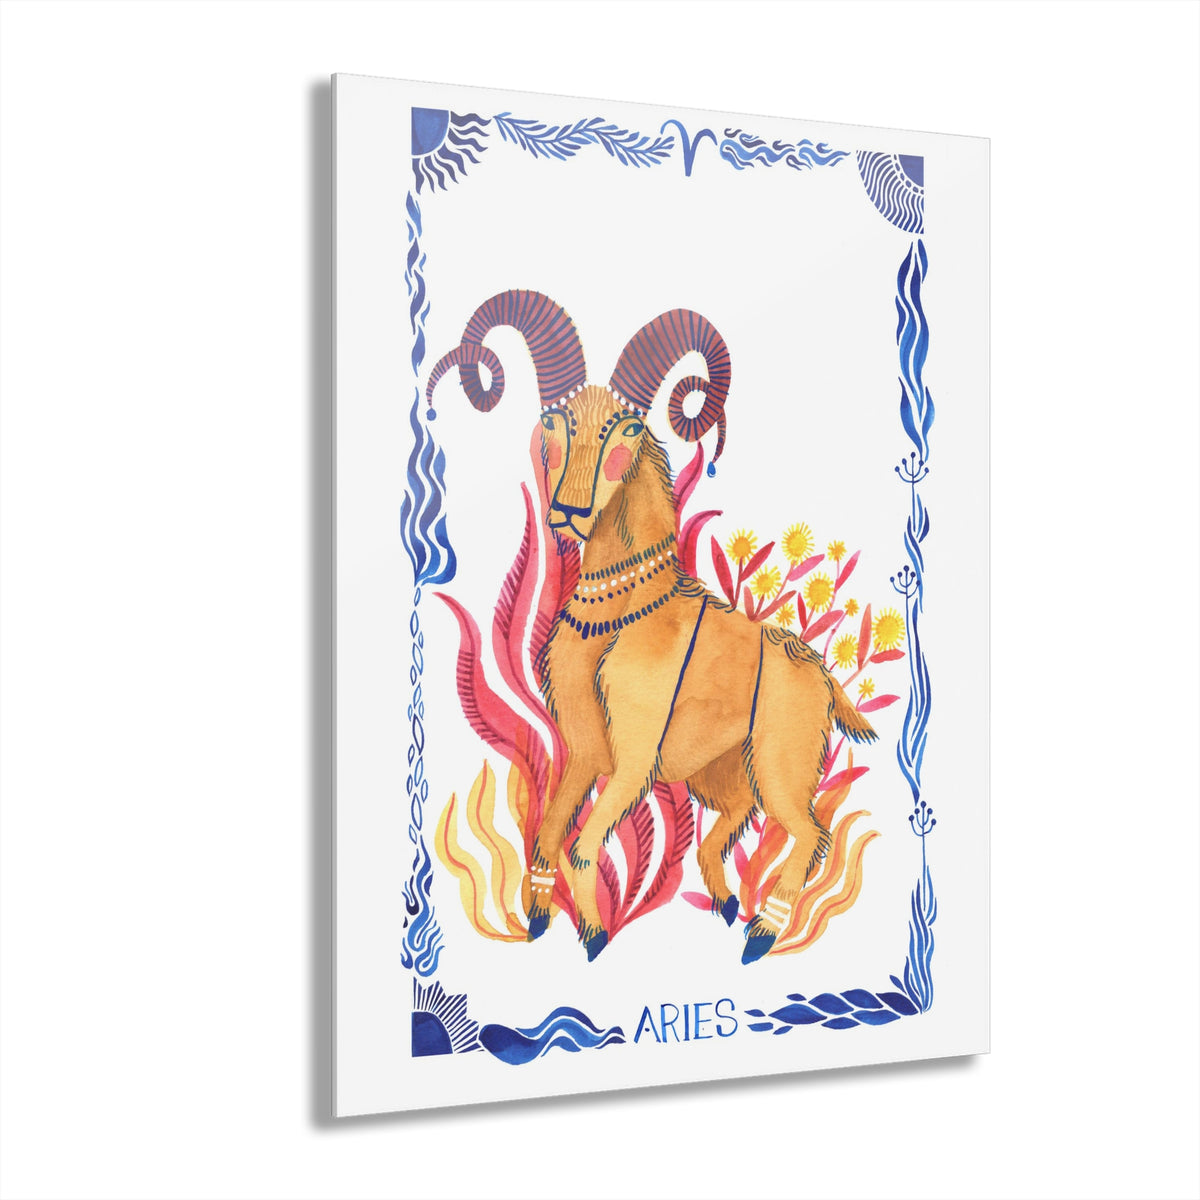 Fire & Fury: Aries Acrylic Print with French Cleat Hanging